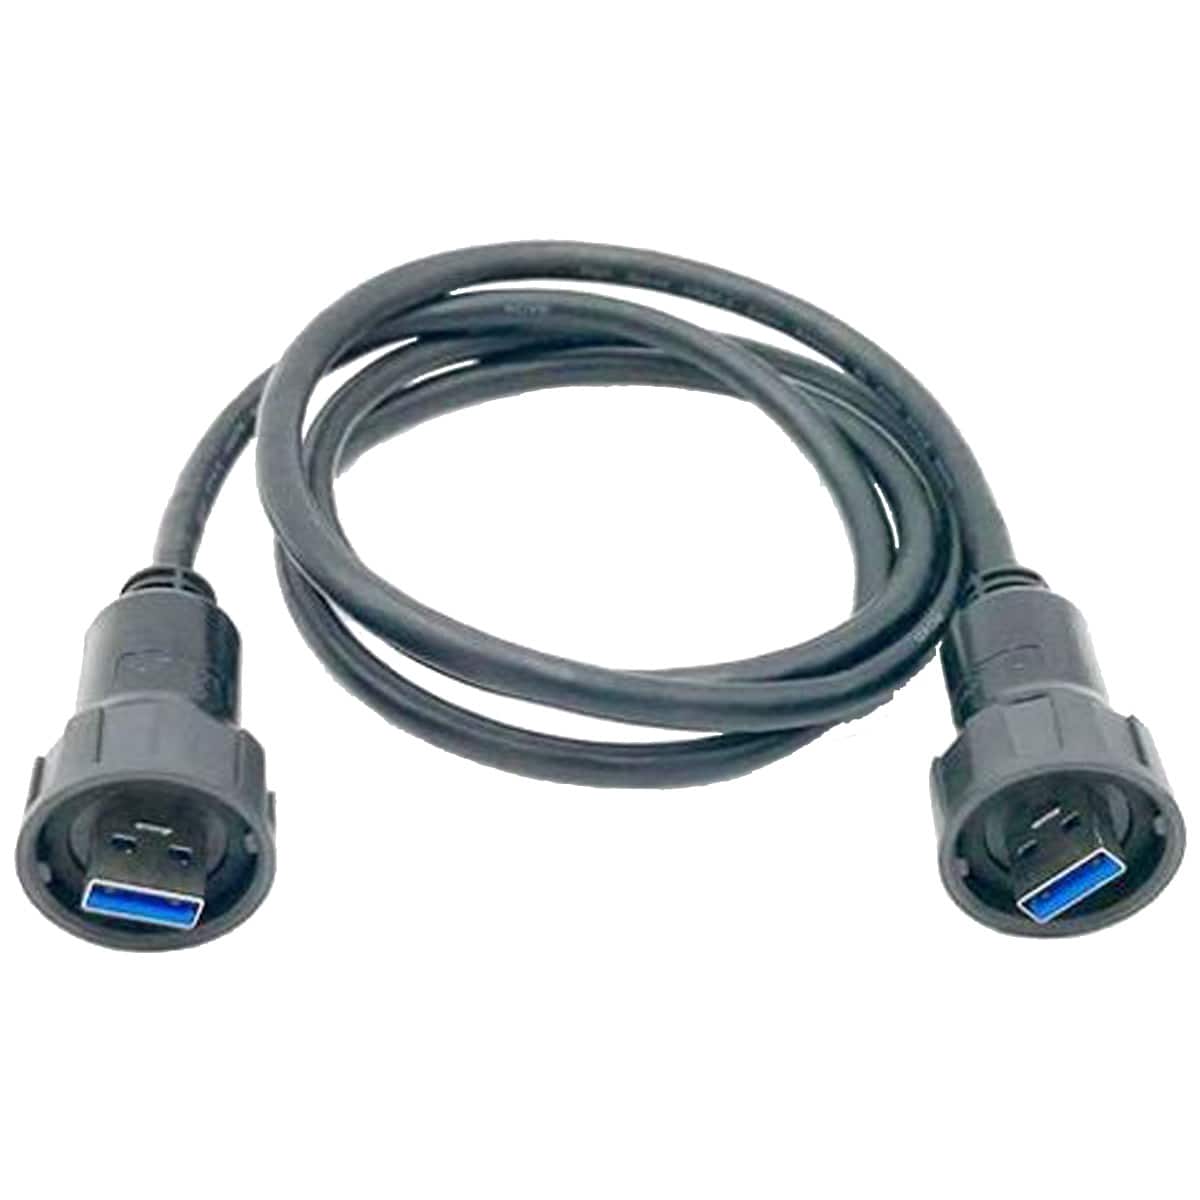 Cord Connector™ Device To Keep Extension Cords Together